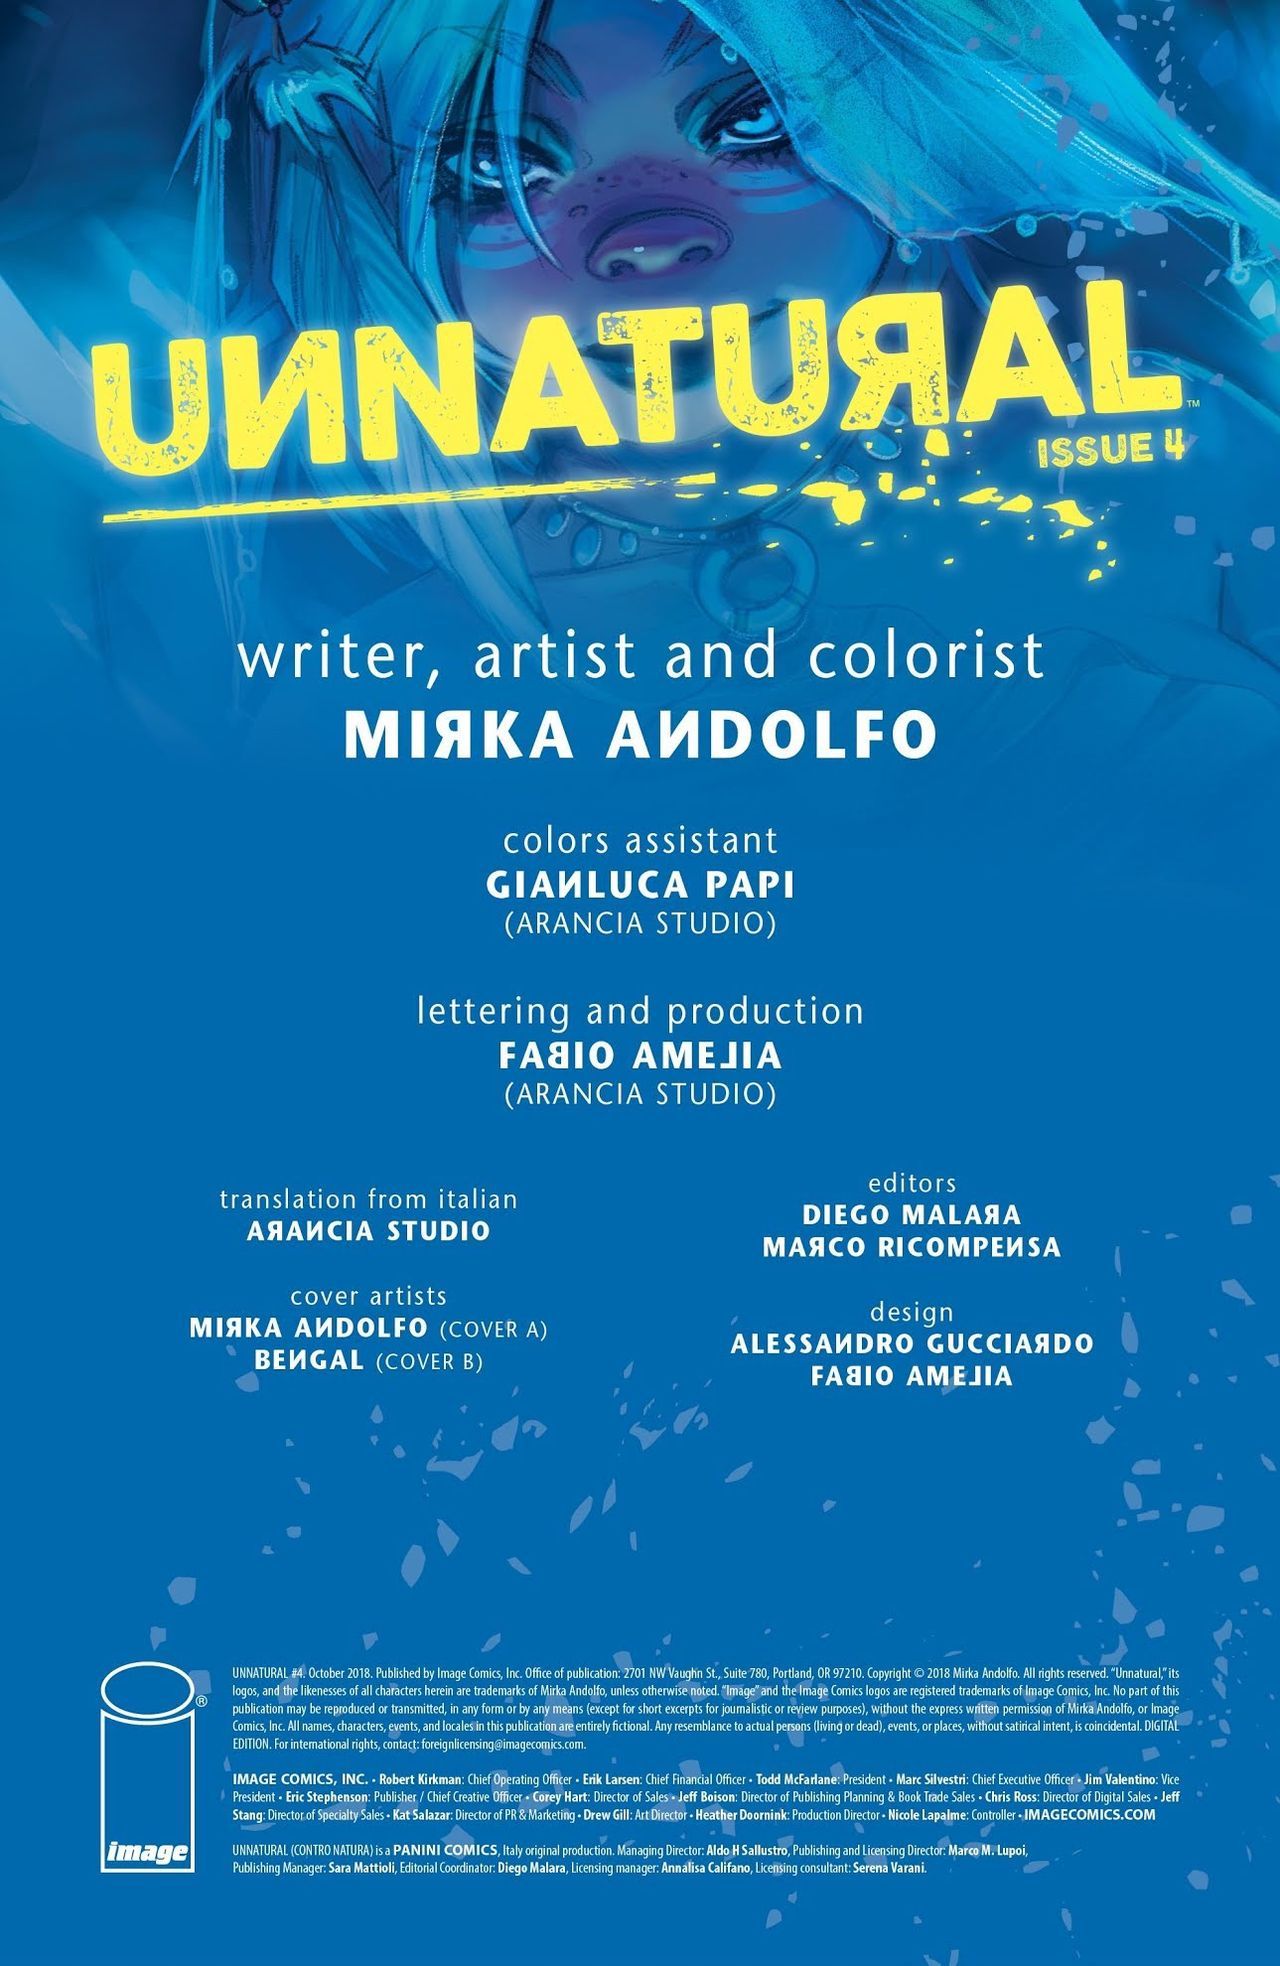 Unnatural Issue 4 by Mirka Andolfo page 2